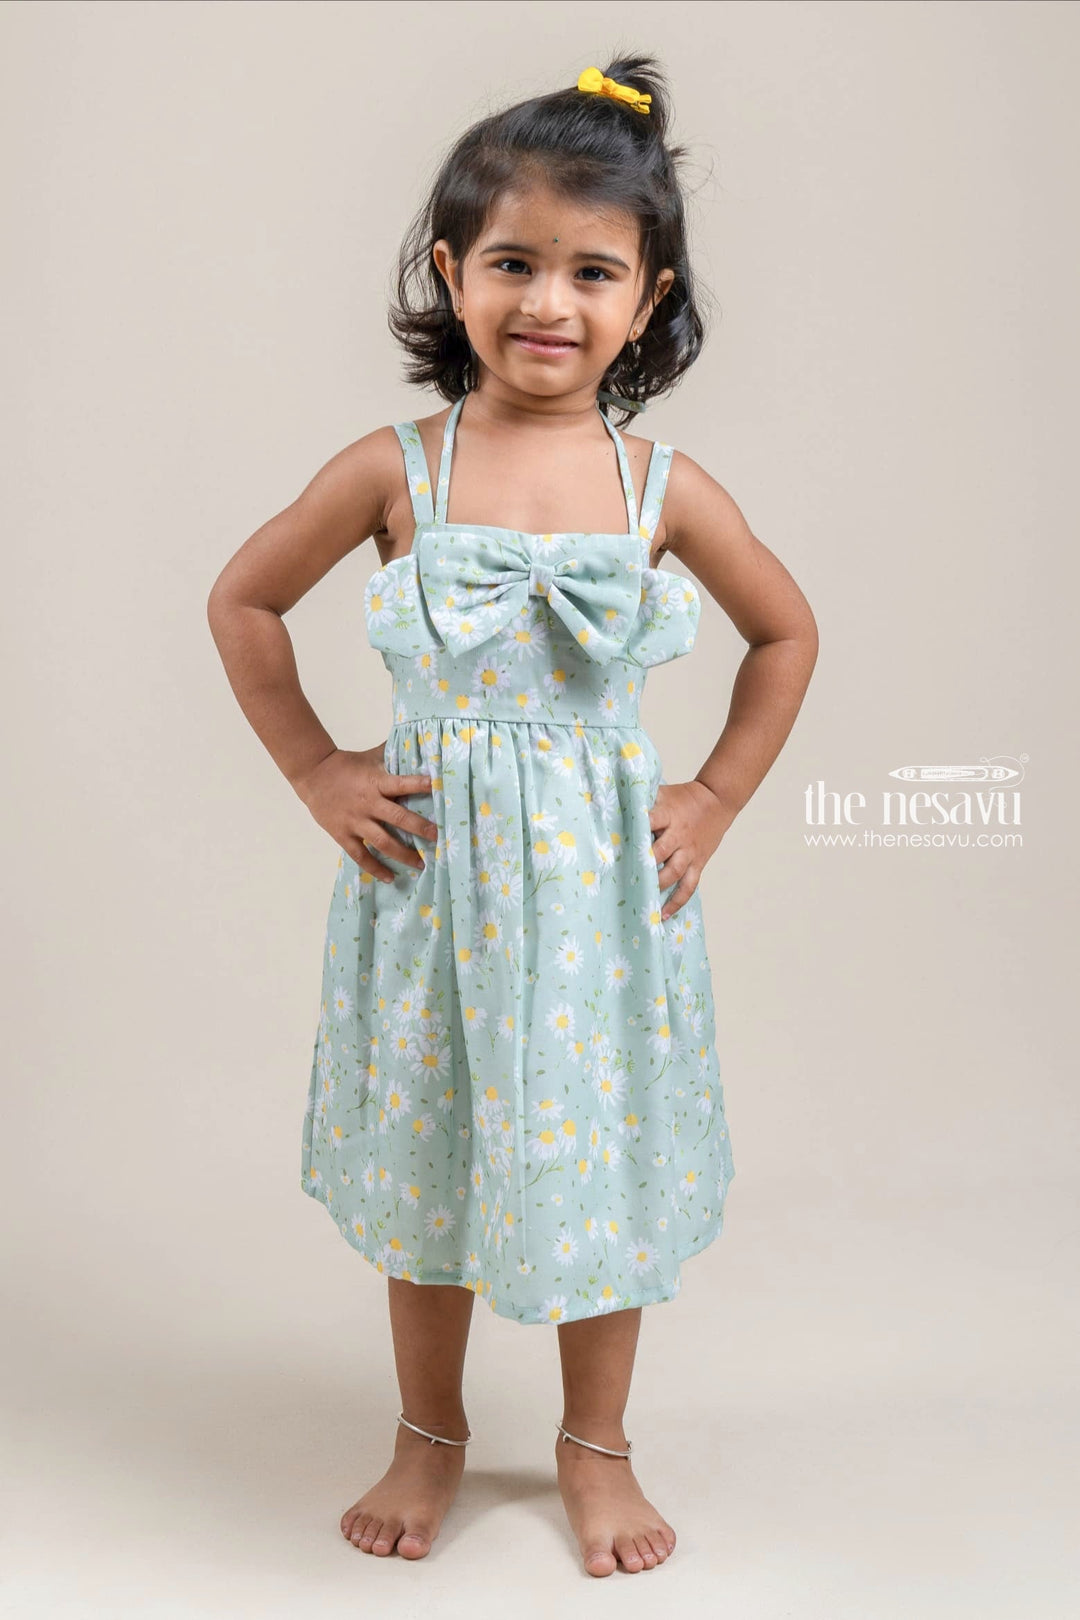 The Nesavu Girls Fancy Frock Gracefull Green Floral Printed Girls Cotton Frock With Bow Applique Nesavu 18 (2Y) / Green / Rayon GFC1038A-18 Premium Cotton Frock For Girls | Frock For Party | The Nesavu